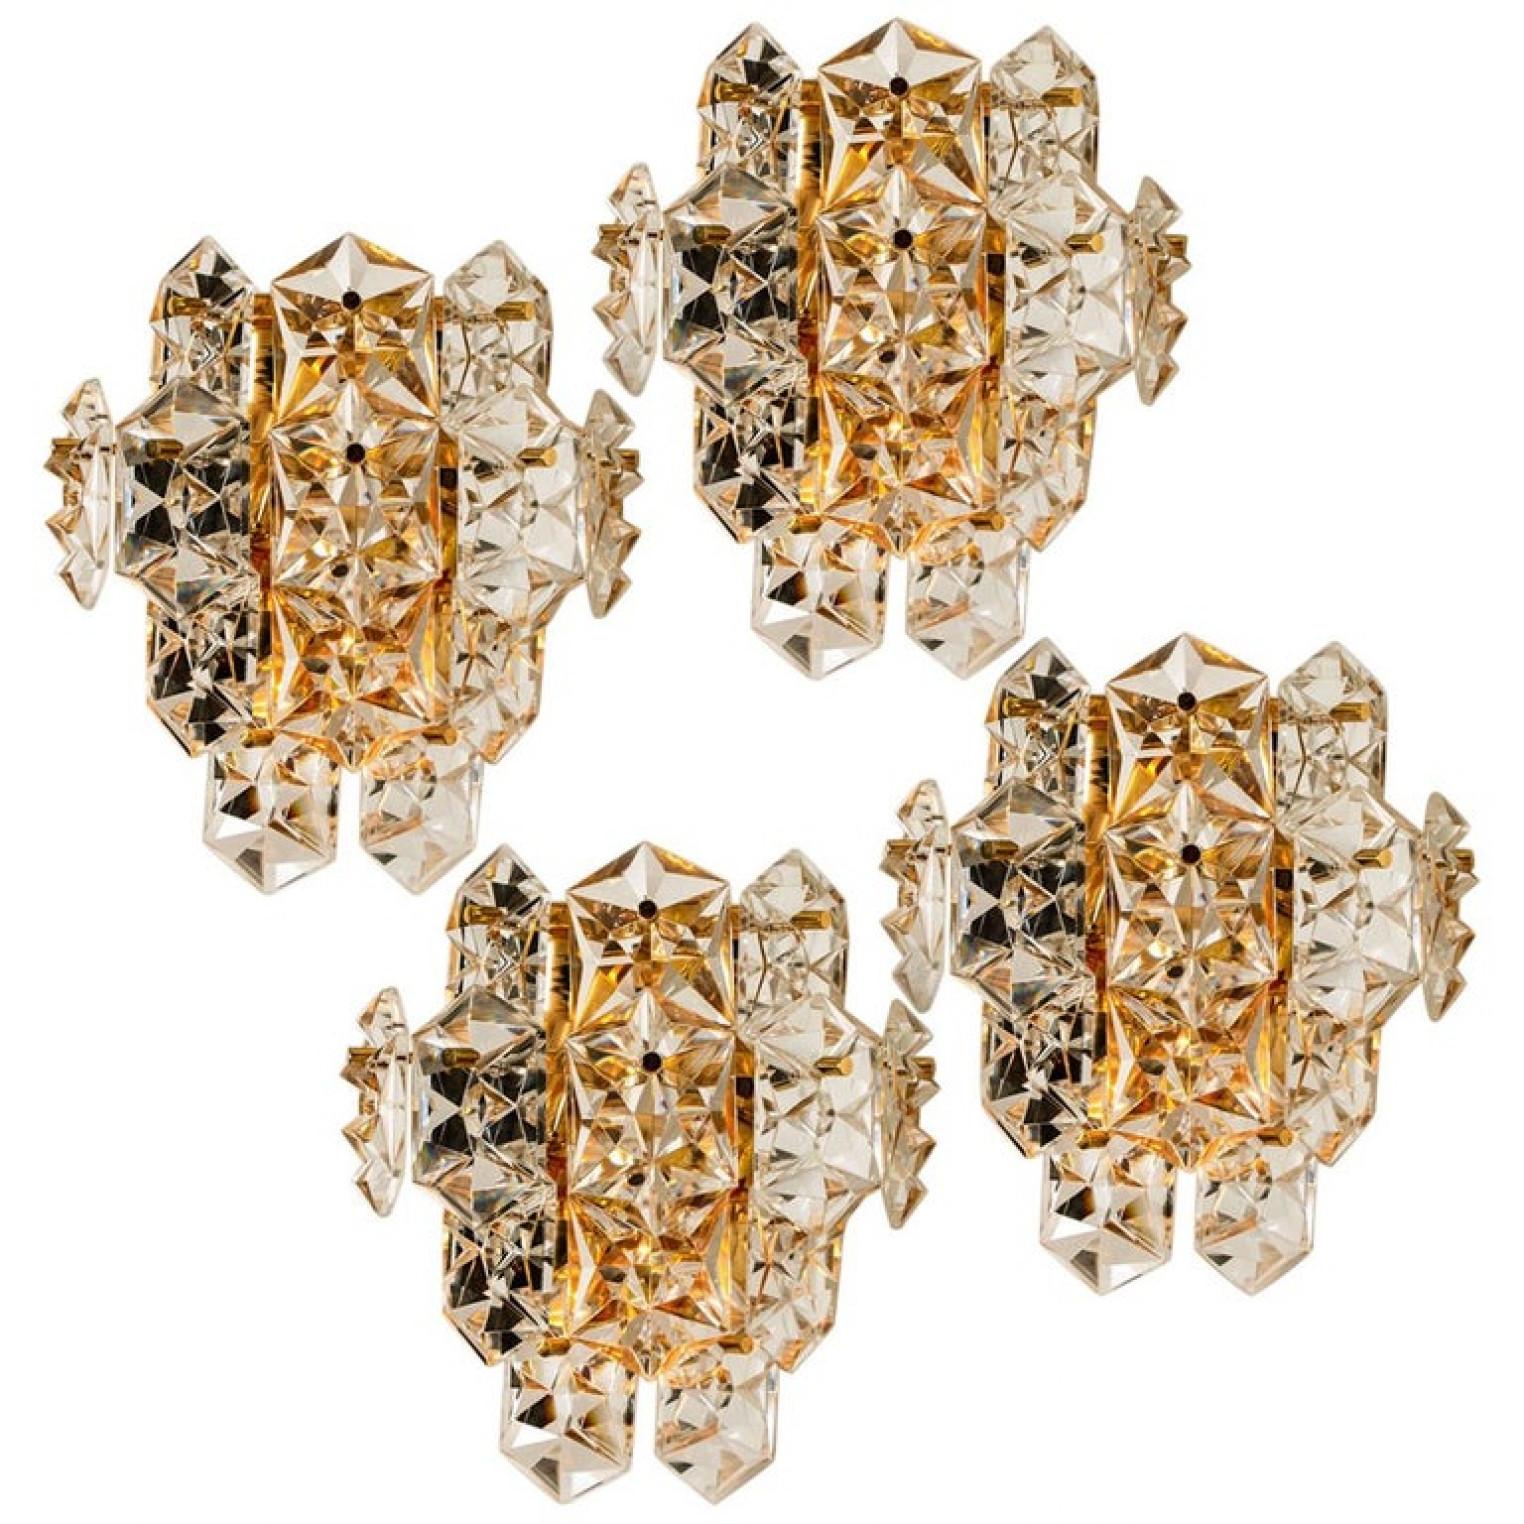 1 of the 4 luxurious pair of gold-plated frames and thick diamond crystal sconces by the famed maker, Kinkeldey. Very elegant light fixtures, comfortable with all decor periods. The crystals are meticulously cut in such a way that radiate the light